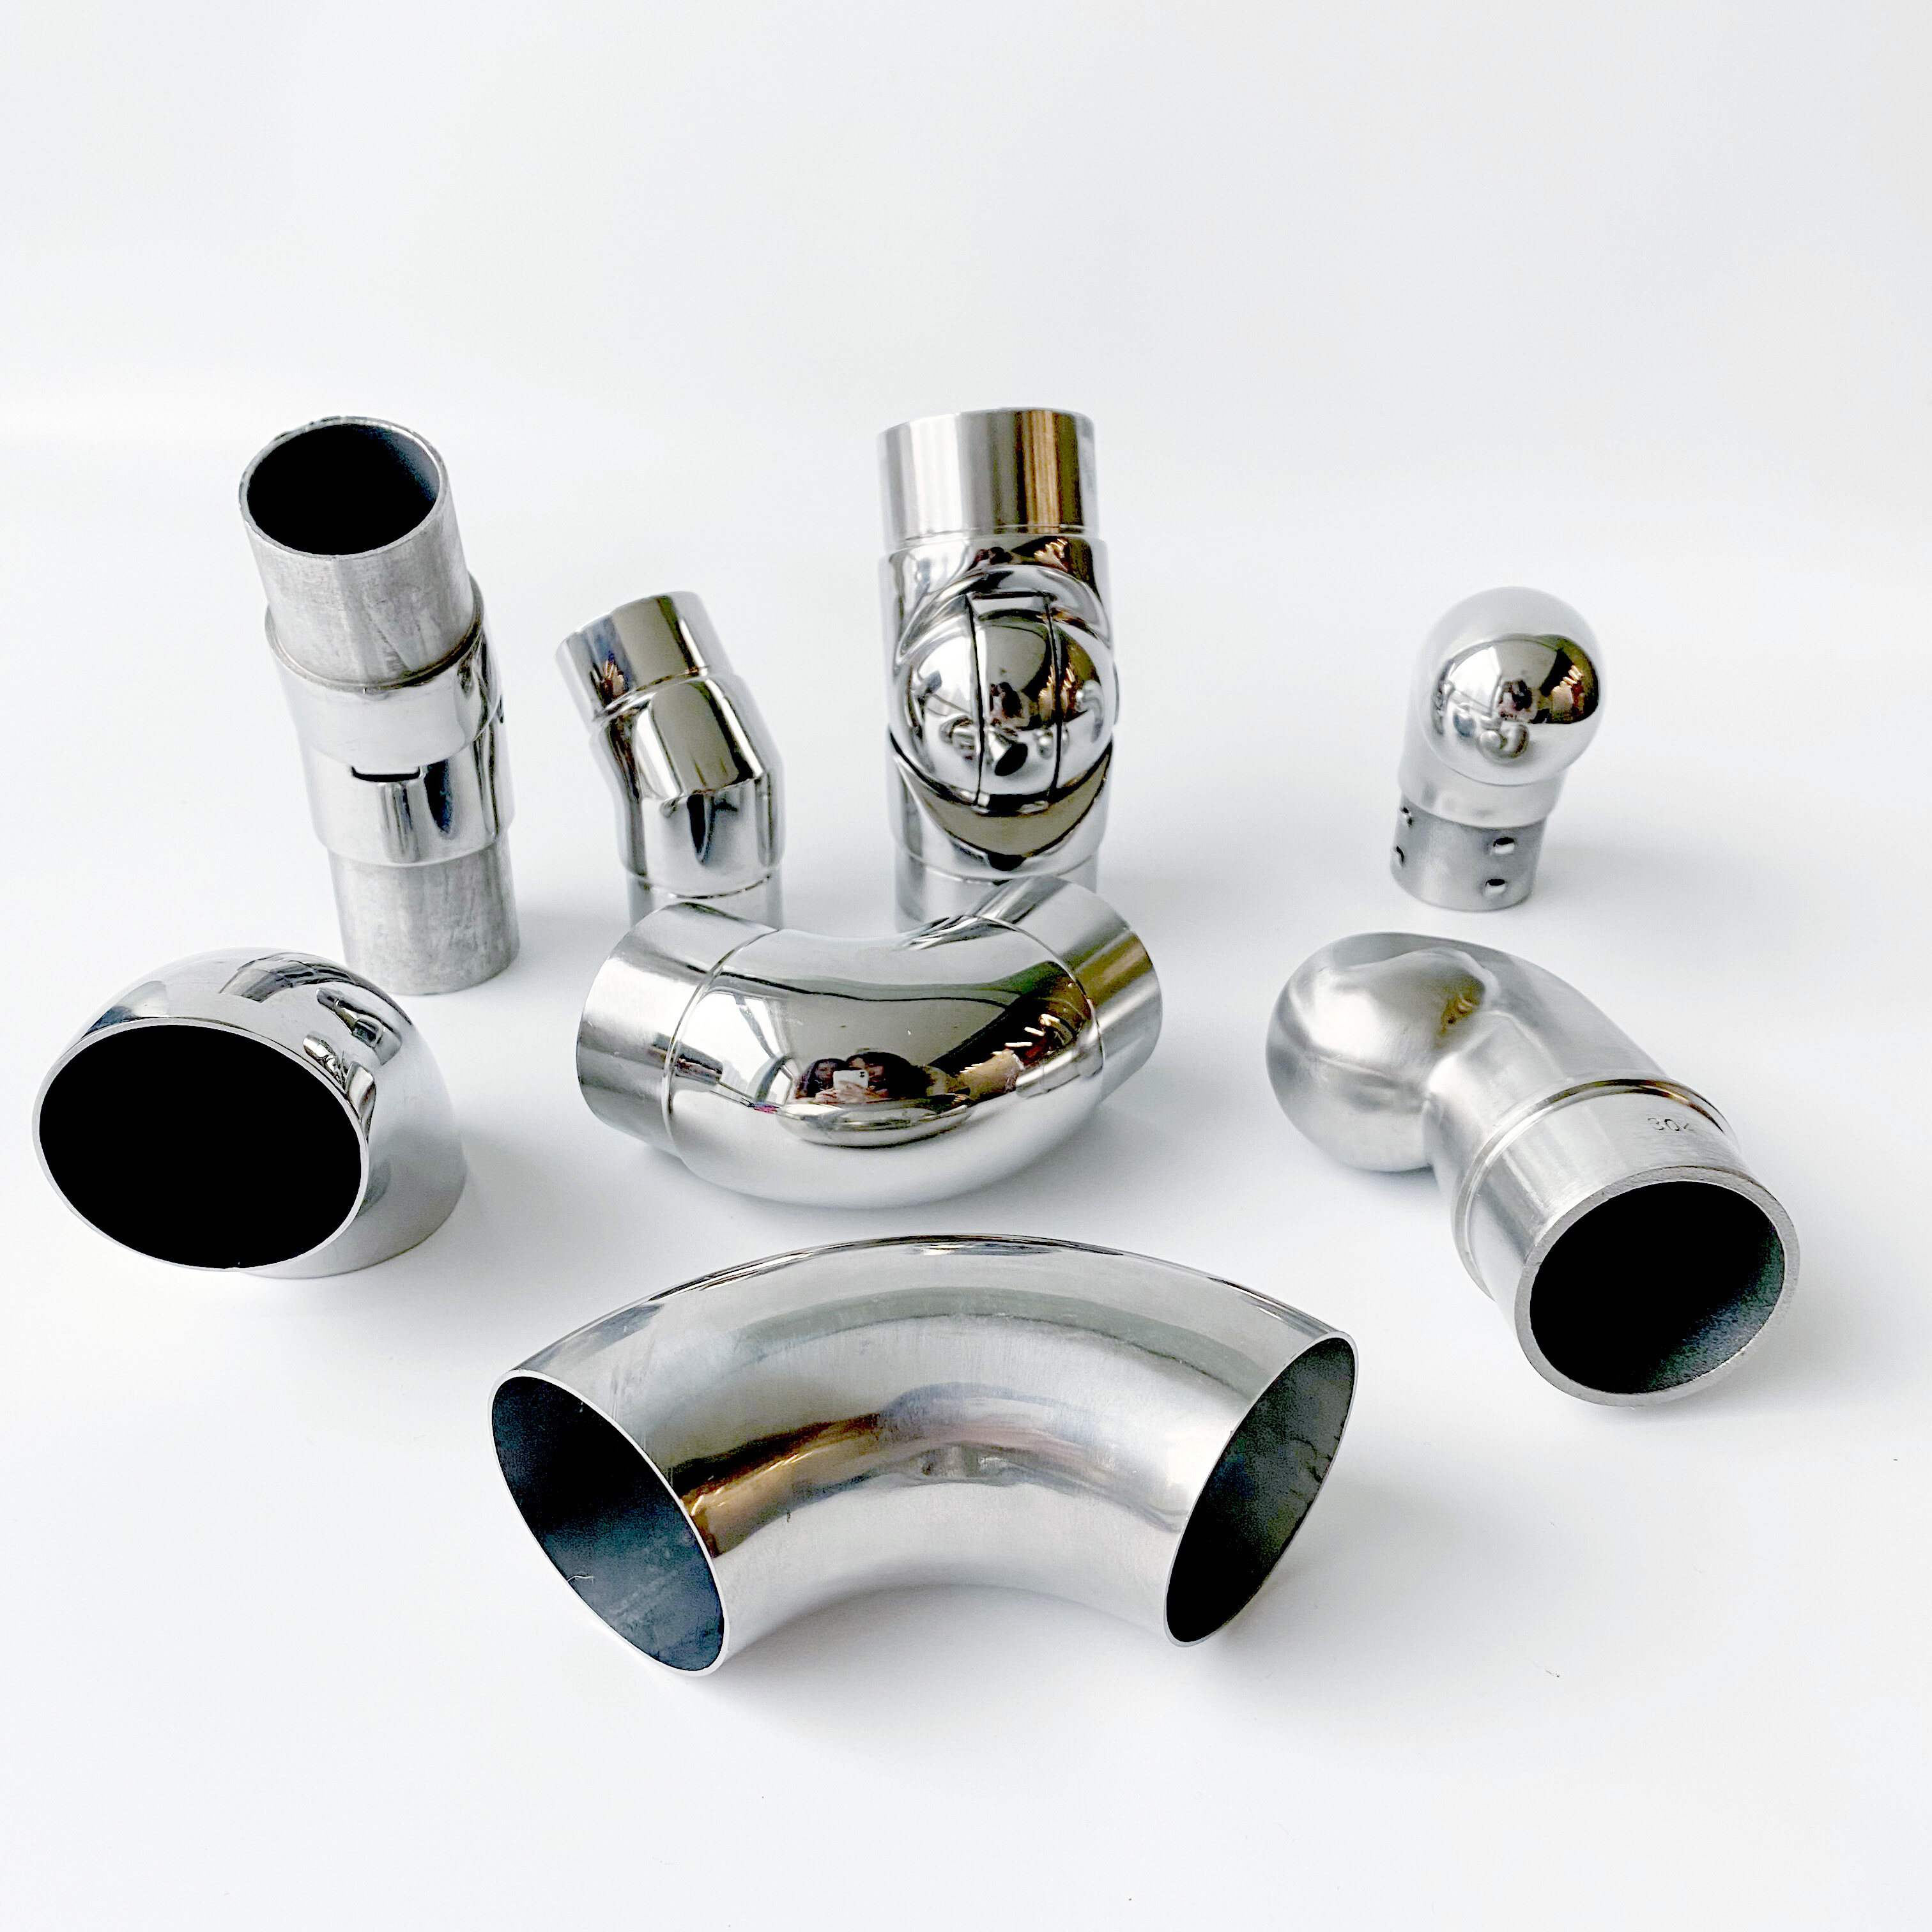 304 Stainless Steel 90 Degree Elbow: A Durable and Stylish Solution for Handrail Construction